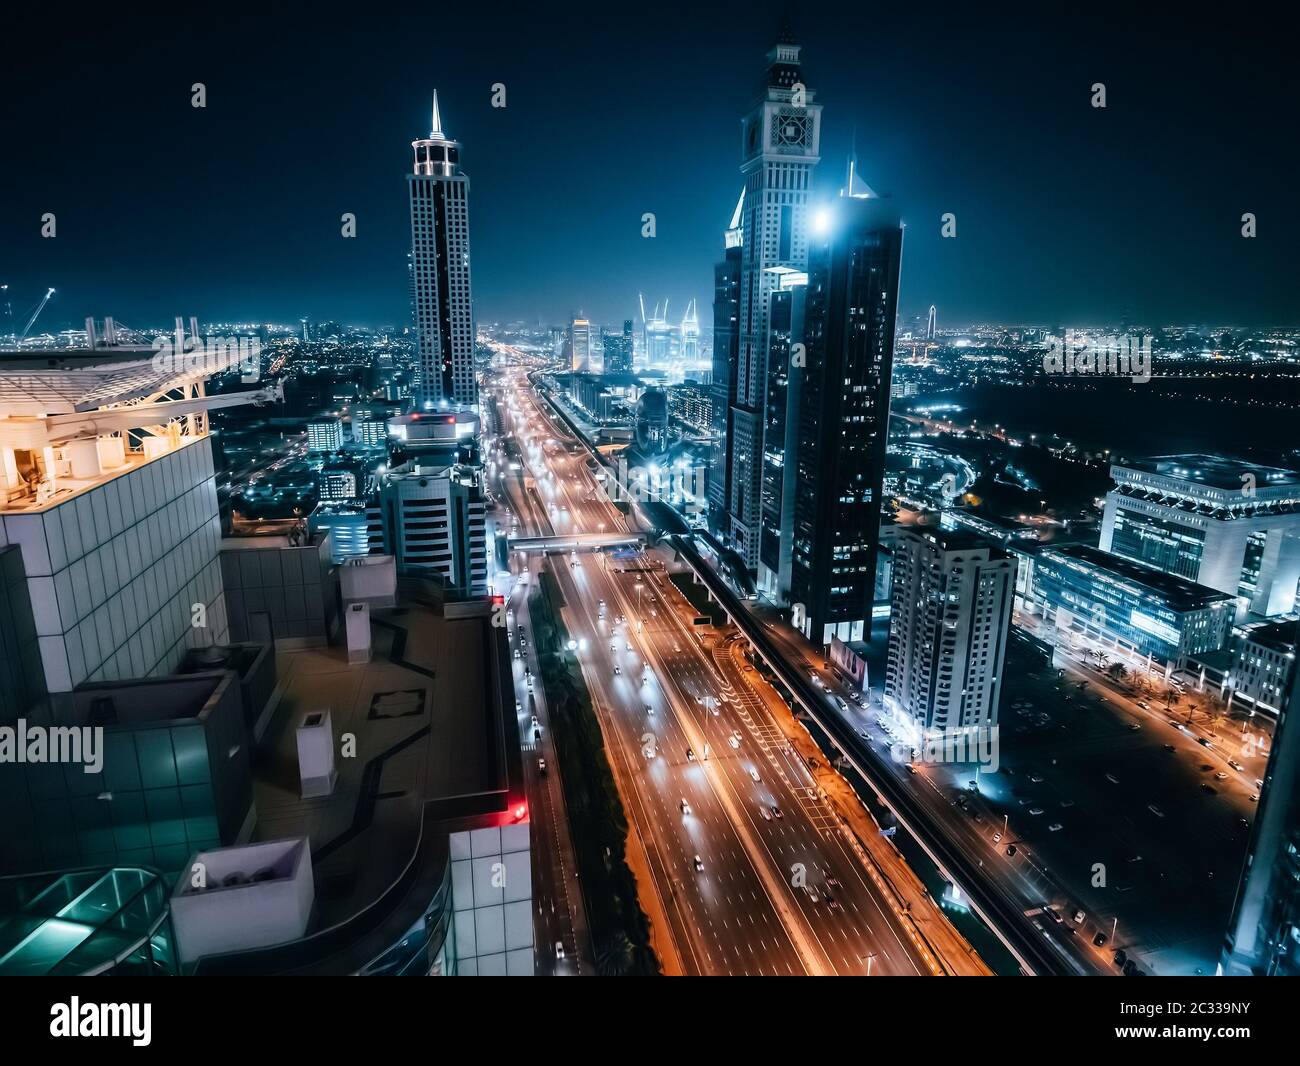 Dubai skyline at night, urban skyscrapers and car traffic, view from above, United Arab Emirates. Stock Photo